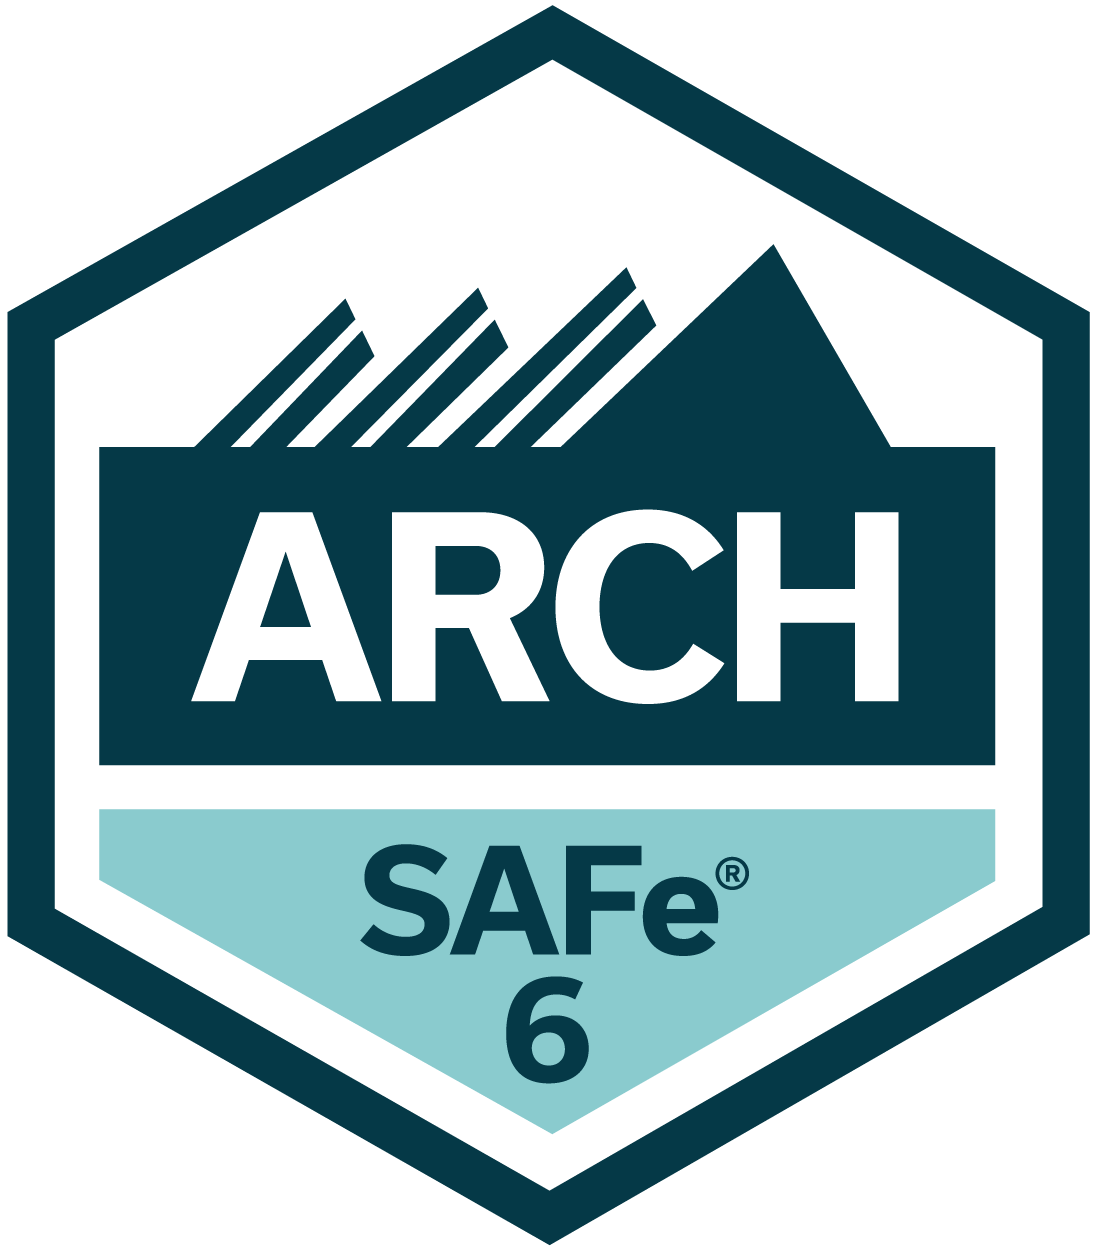 SAFe® for Architects